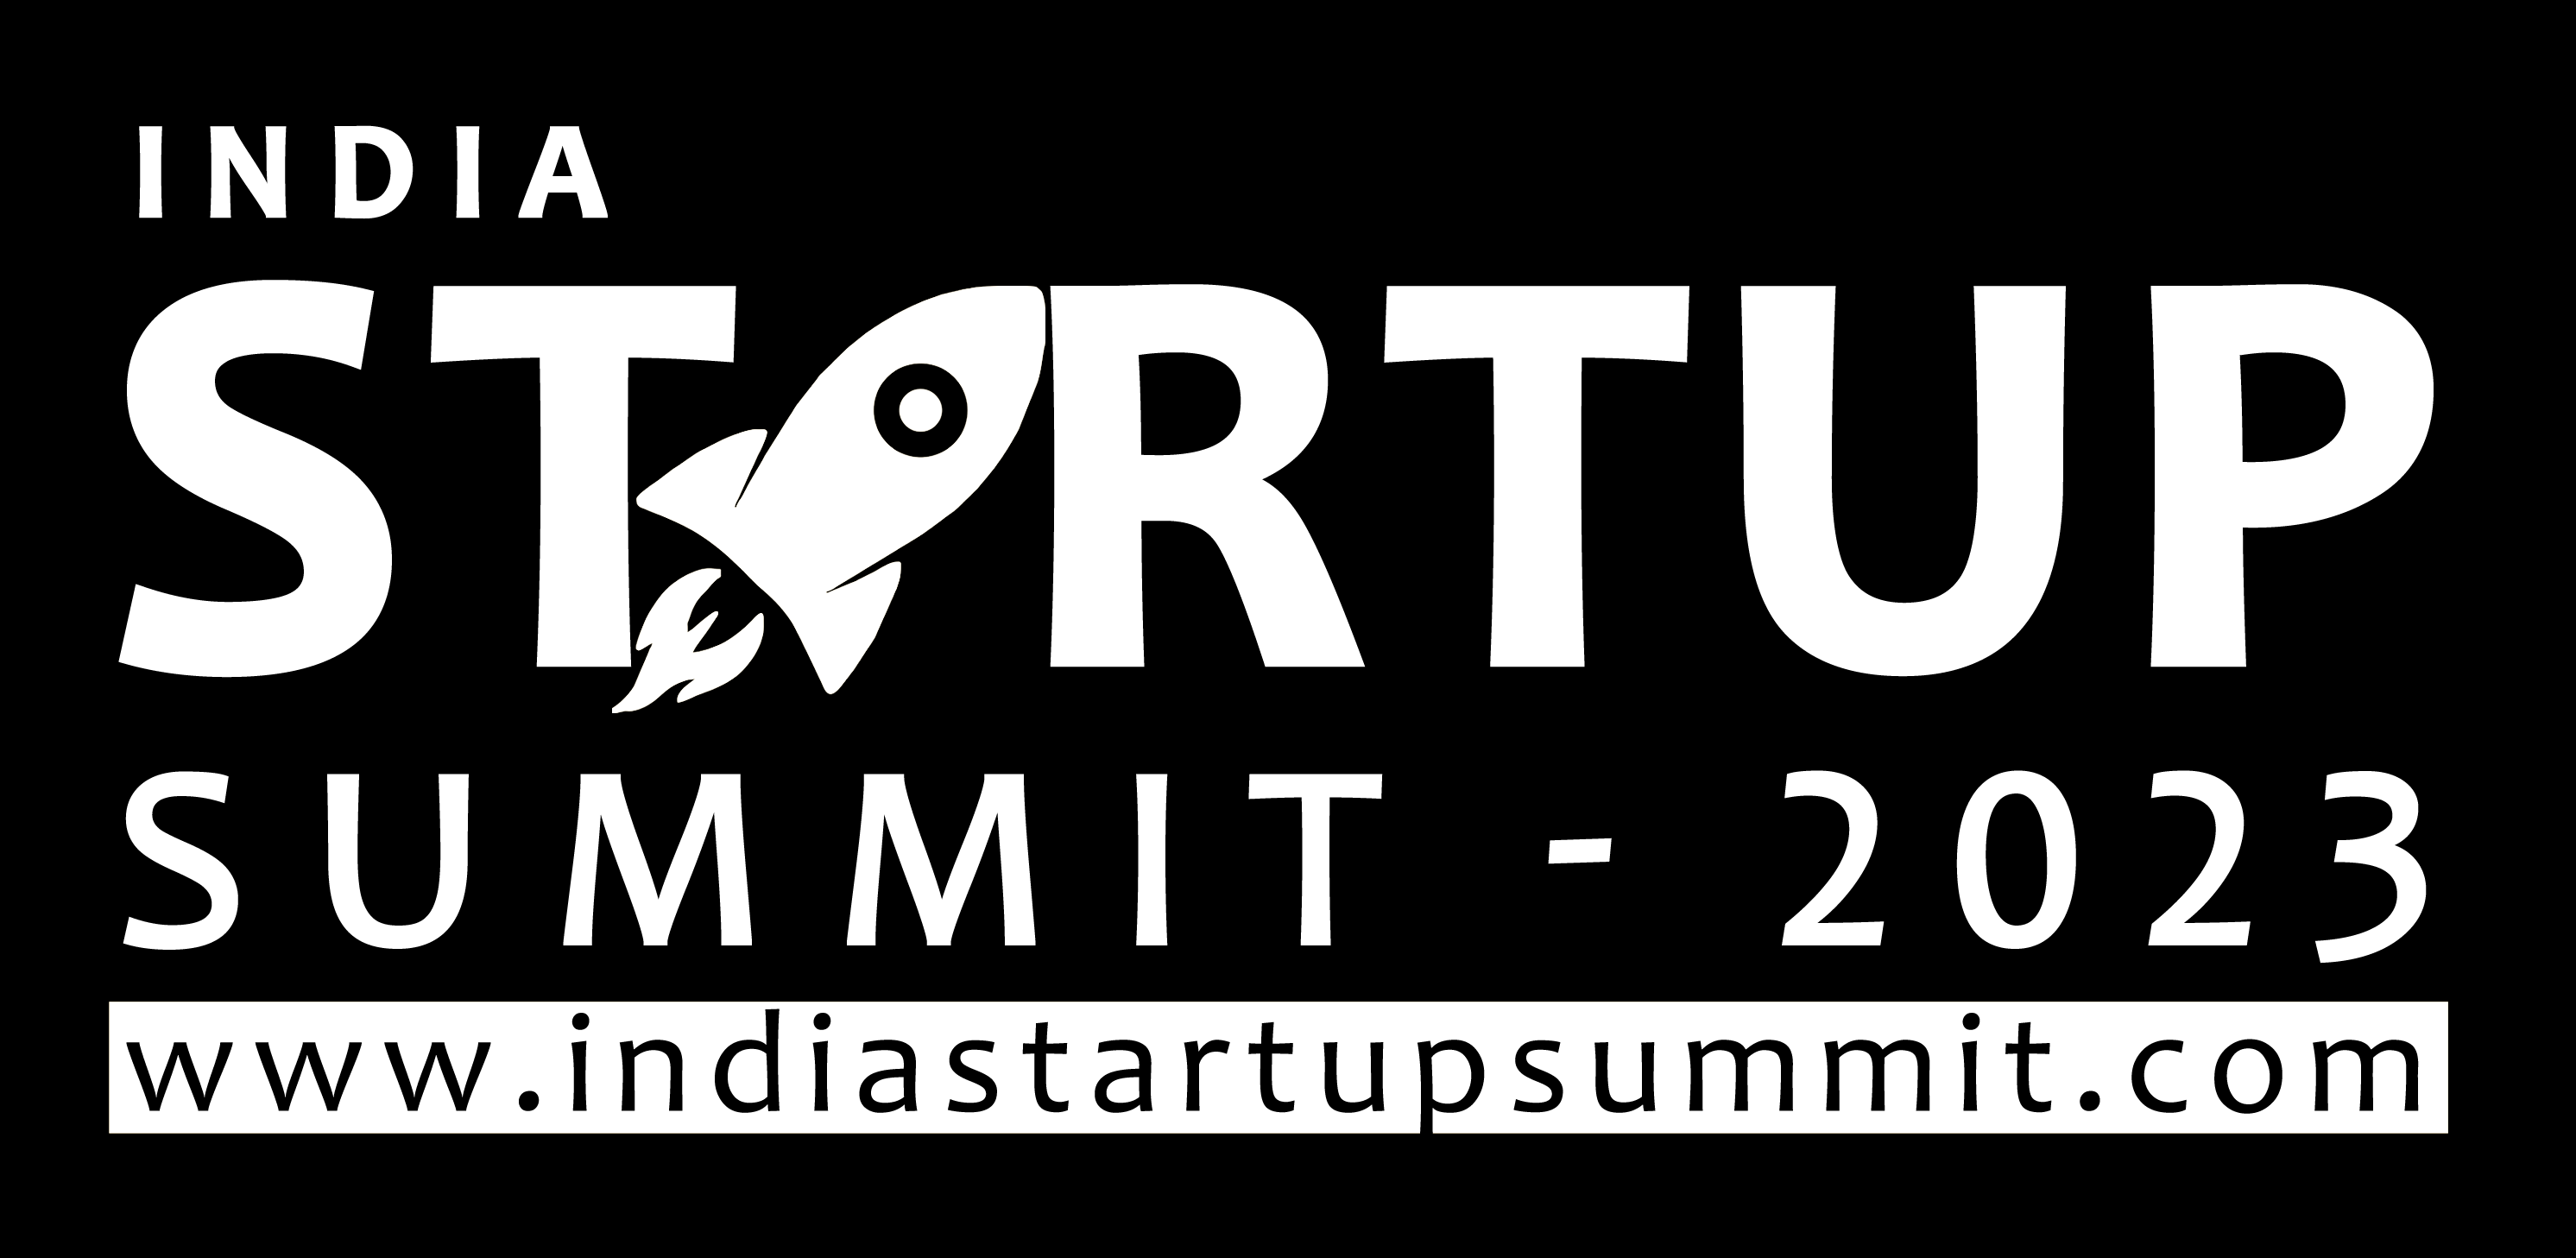 India Startup Summit 2023 | Exhibition | Conference | Live Pitching | Awards